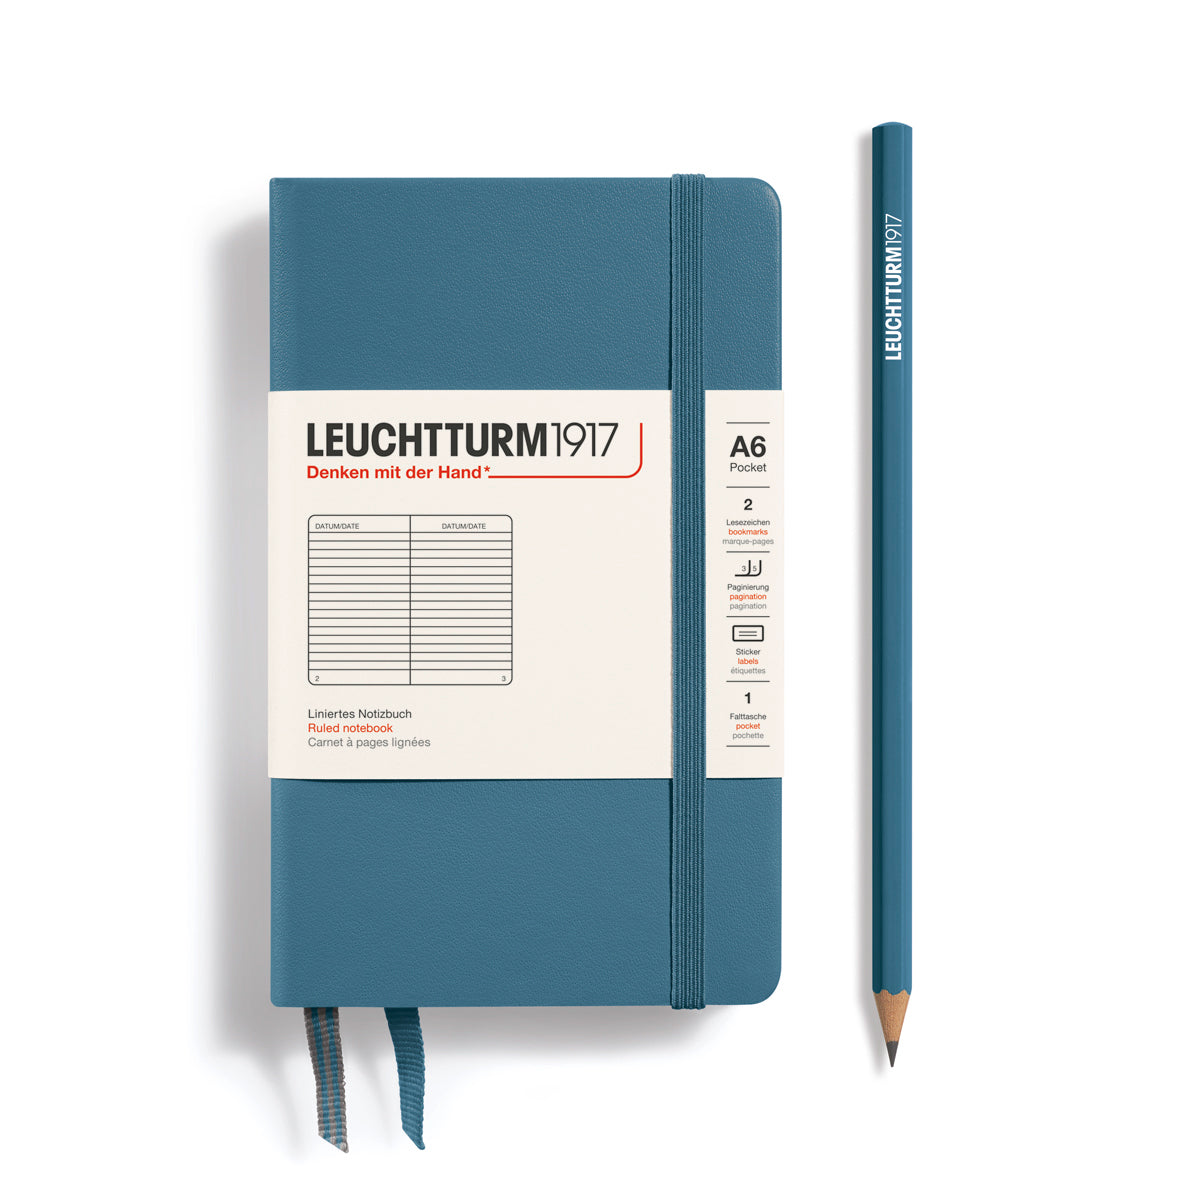 Leuchtturm1917 Notebook A6 Pocket Hardcover in stone blue and lined ruling from penny black